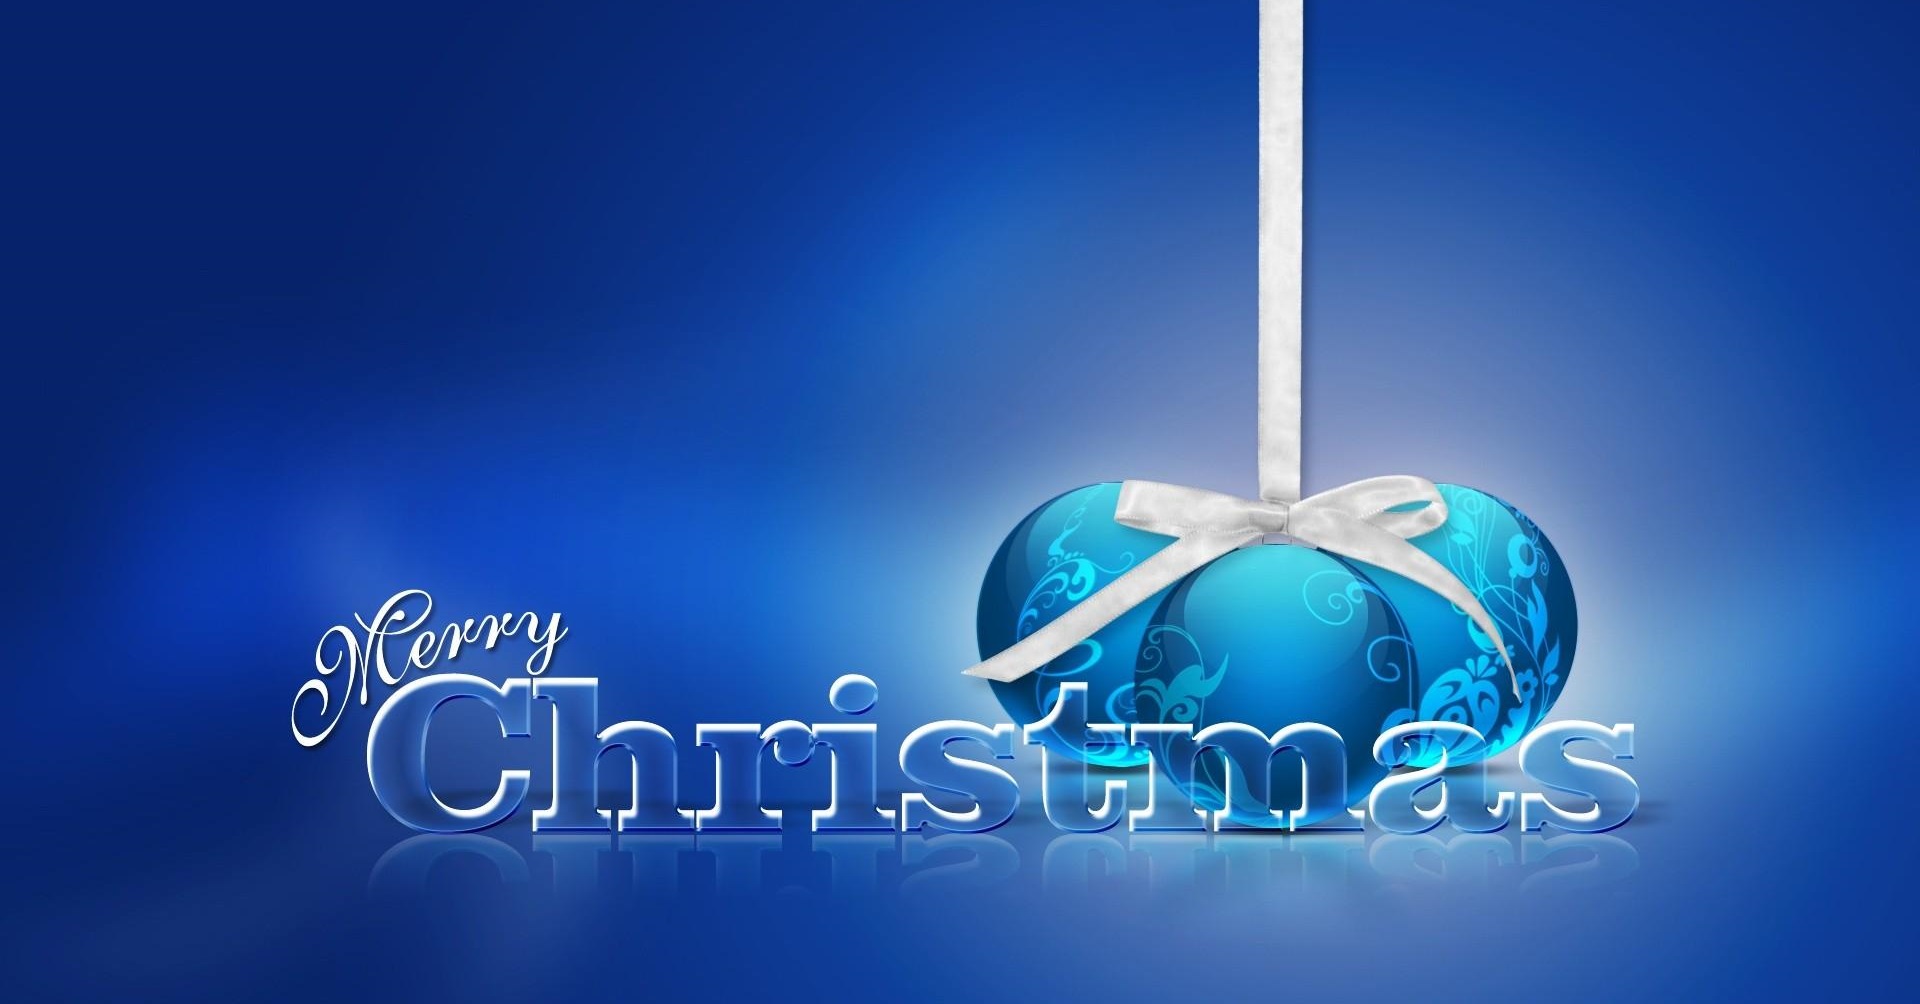 Merry Christmas HD Wallpapers & Images Free Download